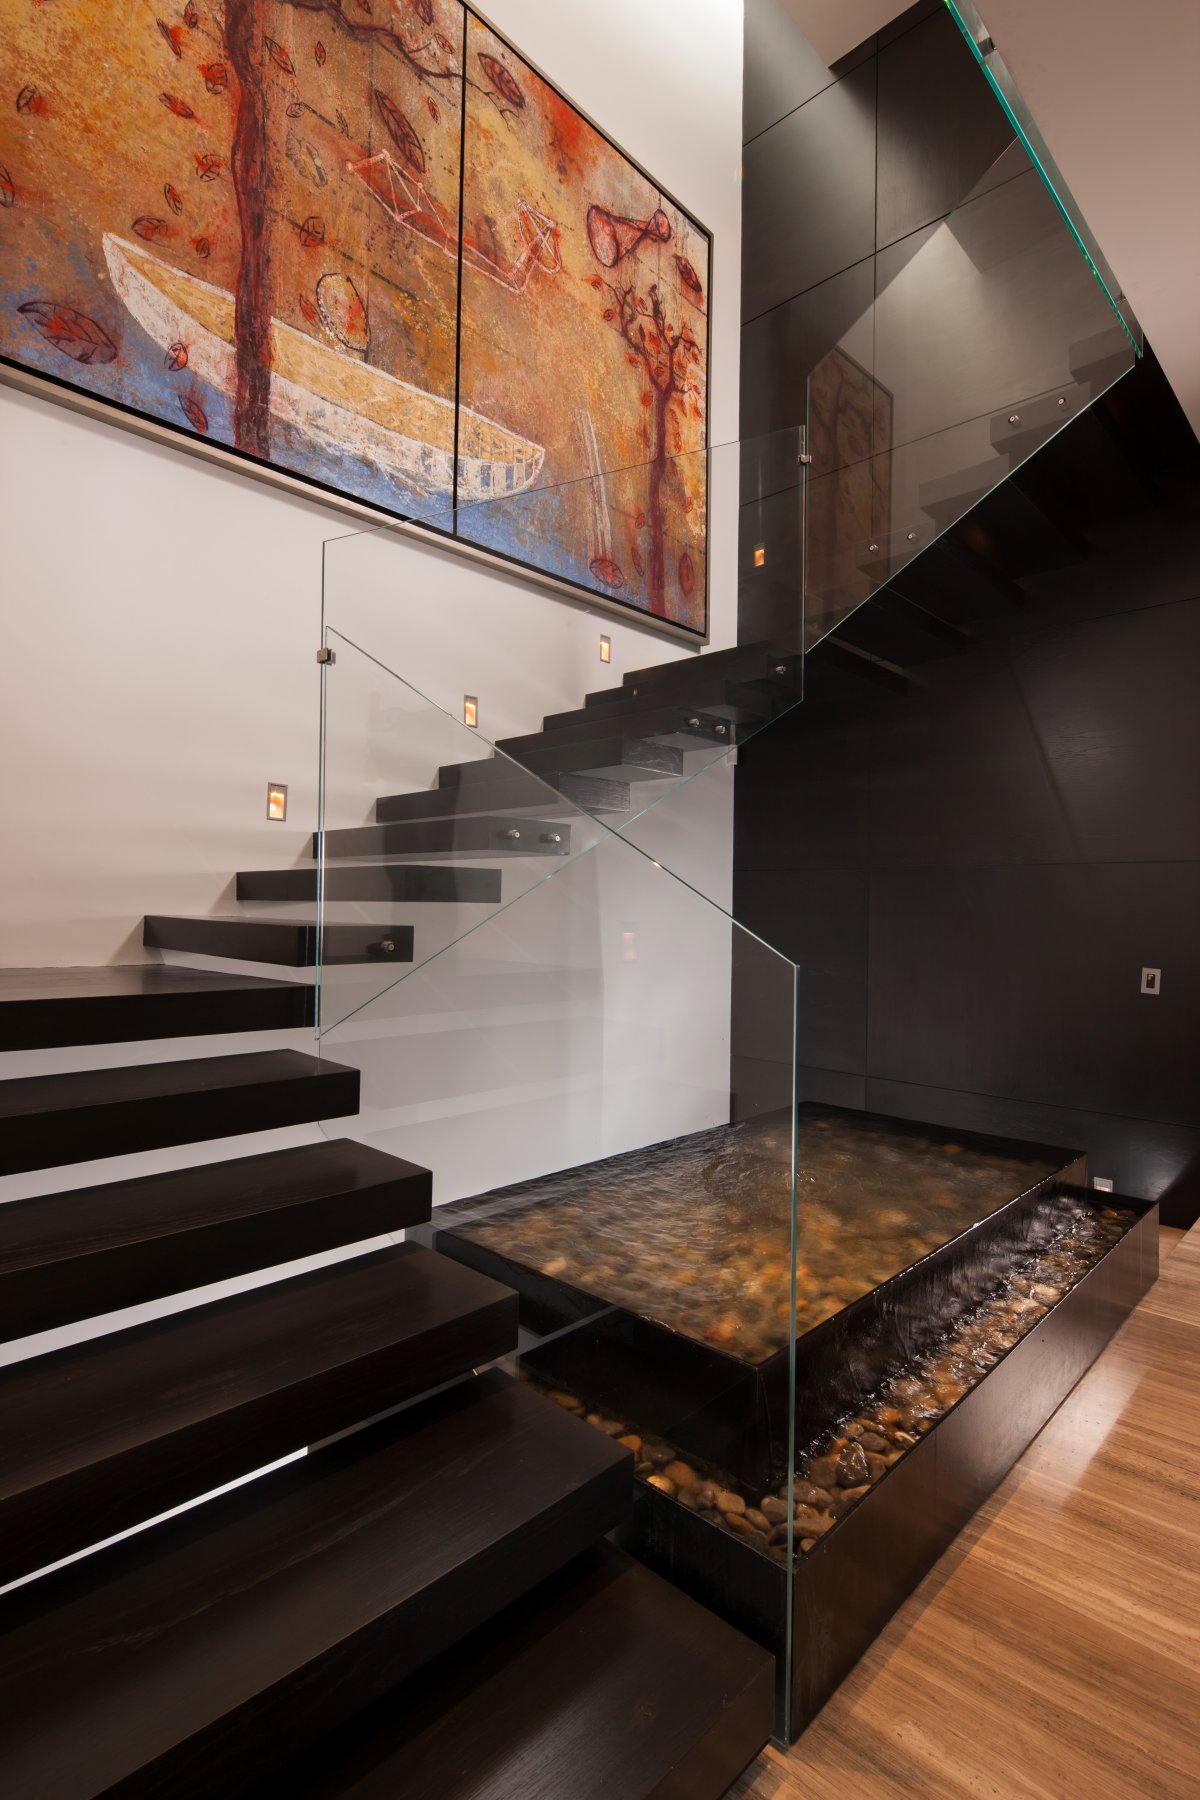 glass wall staircase stairs decor feature designs water modern graceful overall impact decoration floating stairway walls allows stand interior escalier